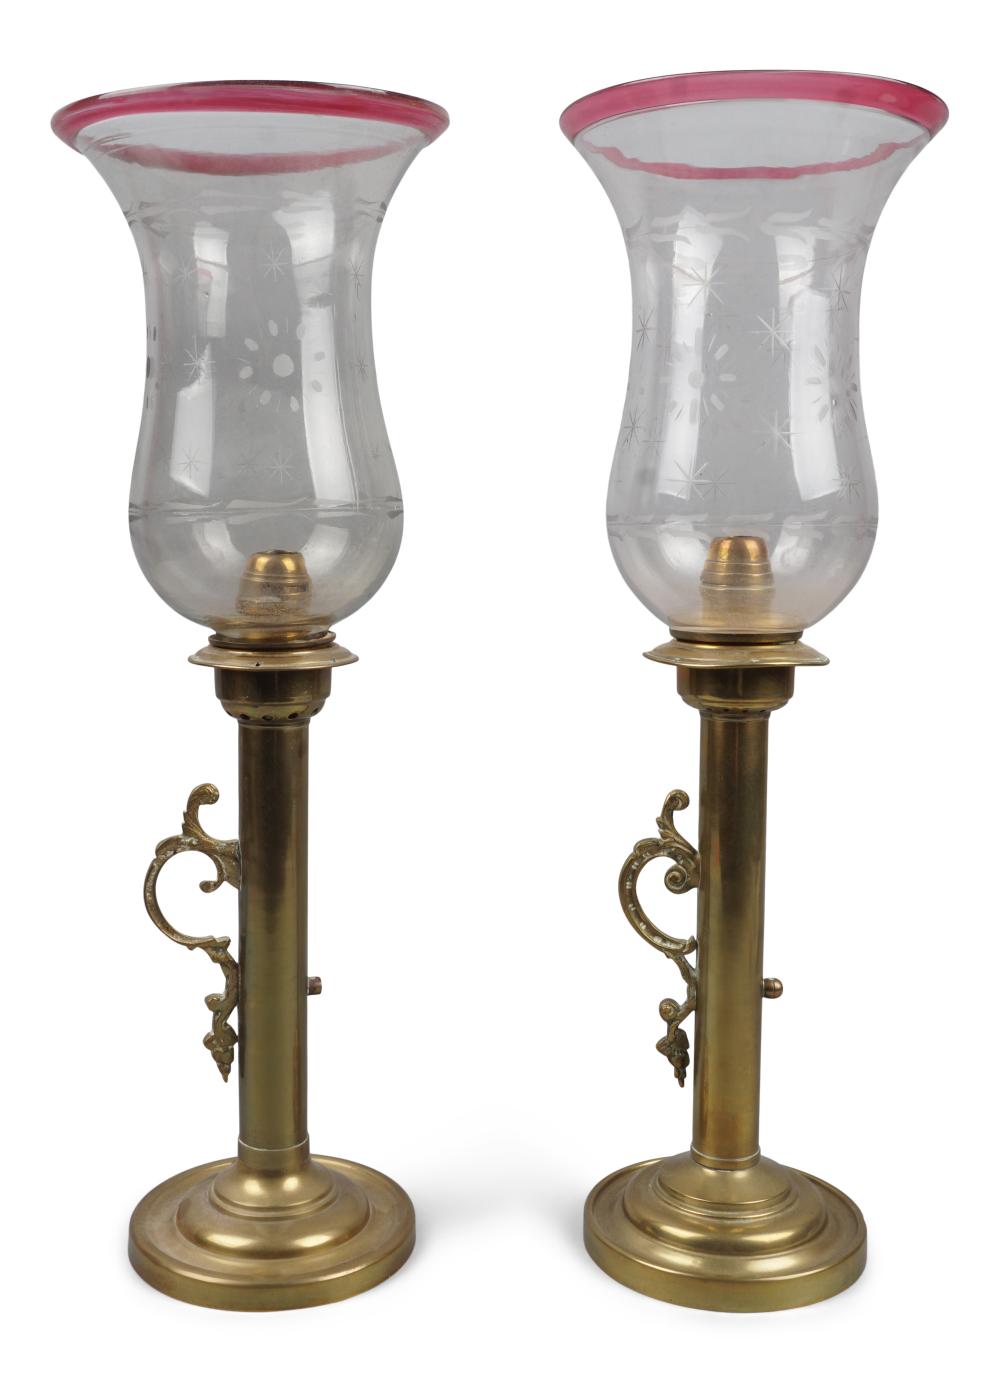 PAIR OF BRASS LAMPS WITH CRANBERRY 33dc15